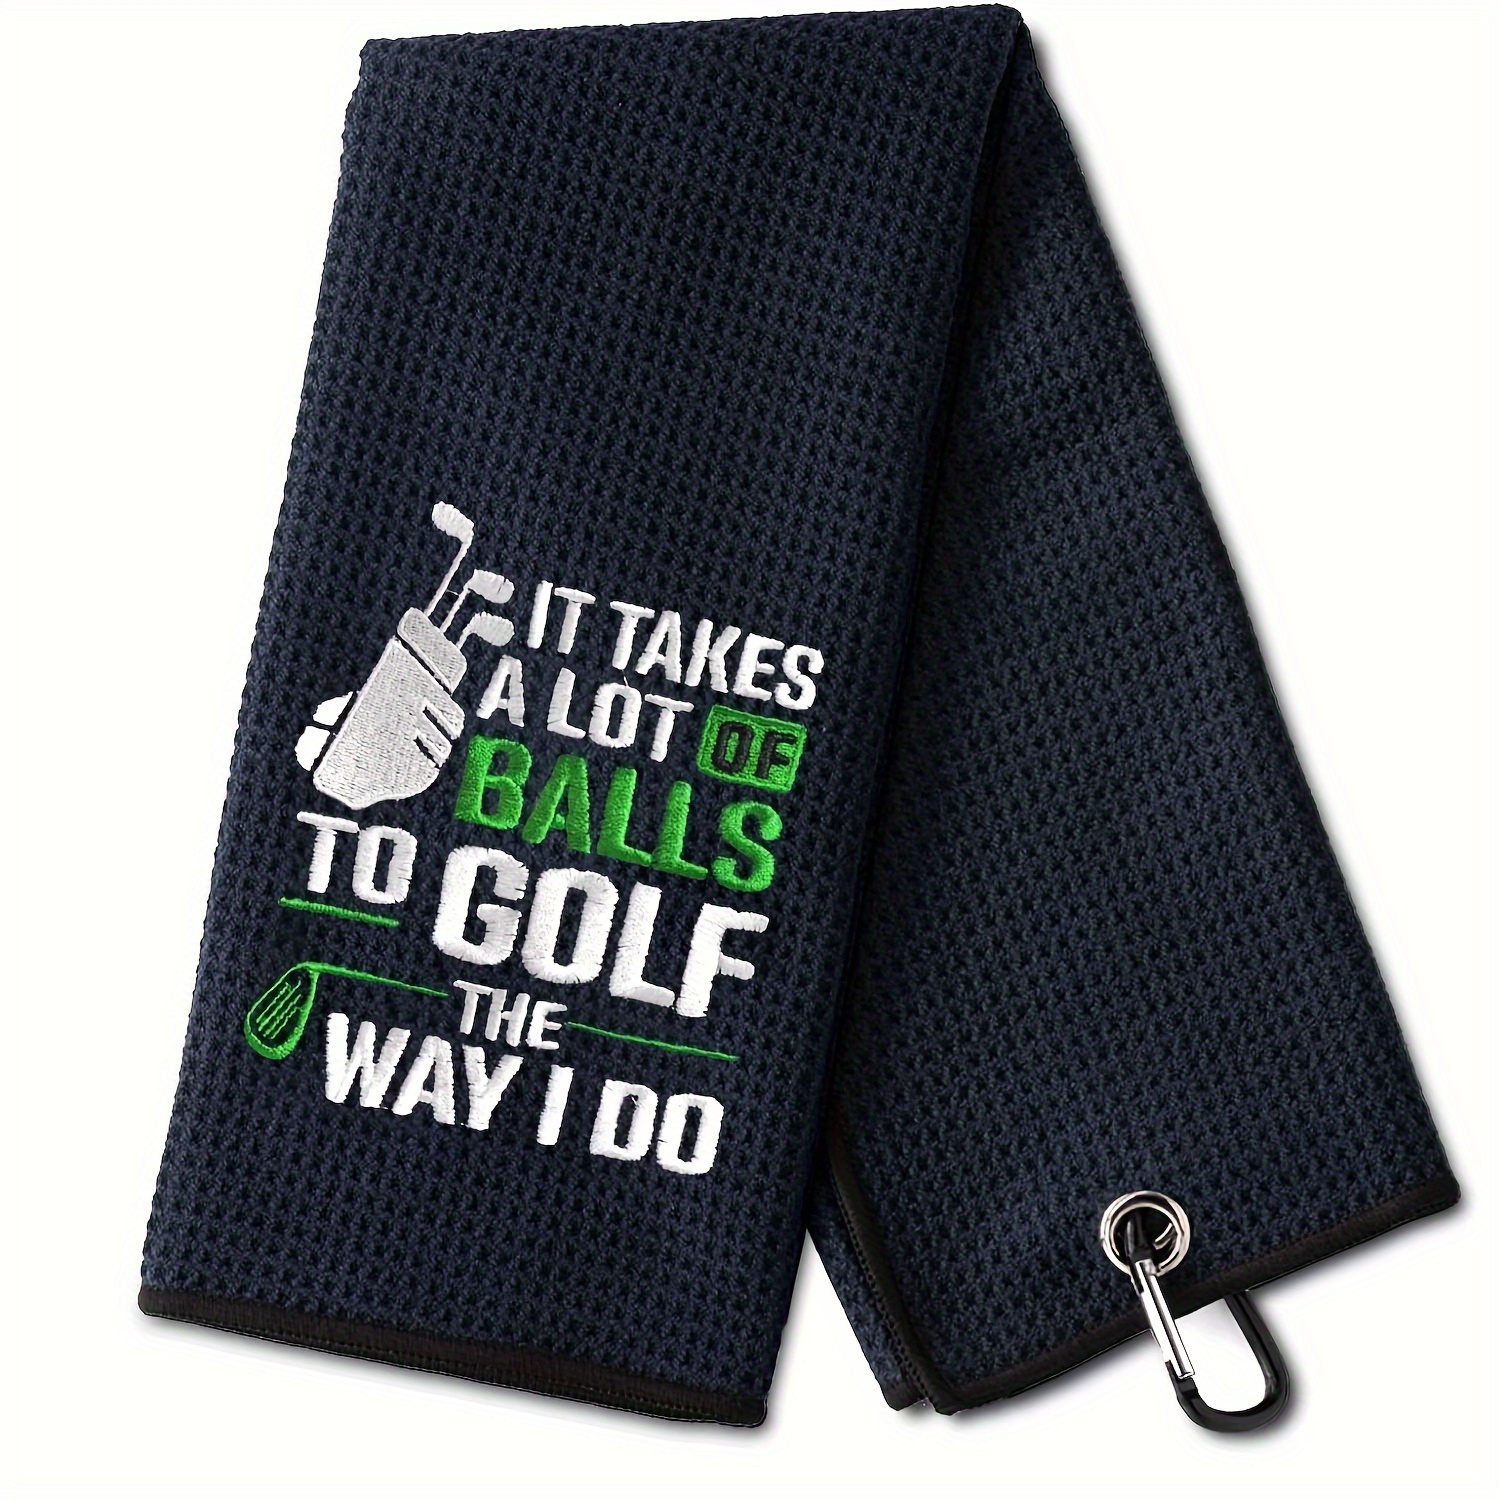 

1pc Camping Towel - It Takes A Lot Of Ball Funny Golf Towel - Embroidered Golf Towels For Golf Bags With Clip, Men's Golf Accessories, Fathers Day, Birthday, Retirement Gifts For Golf Fan And Dad